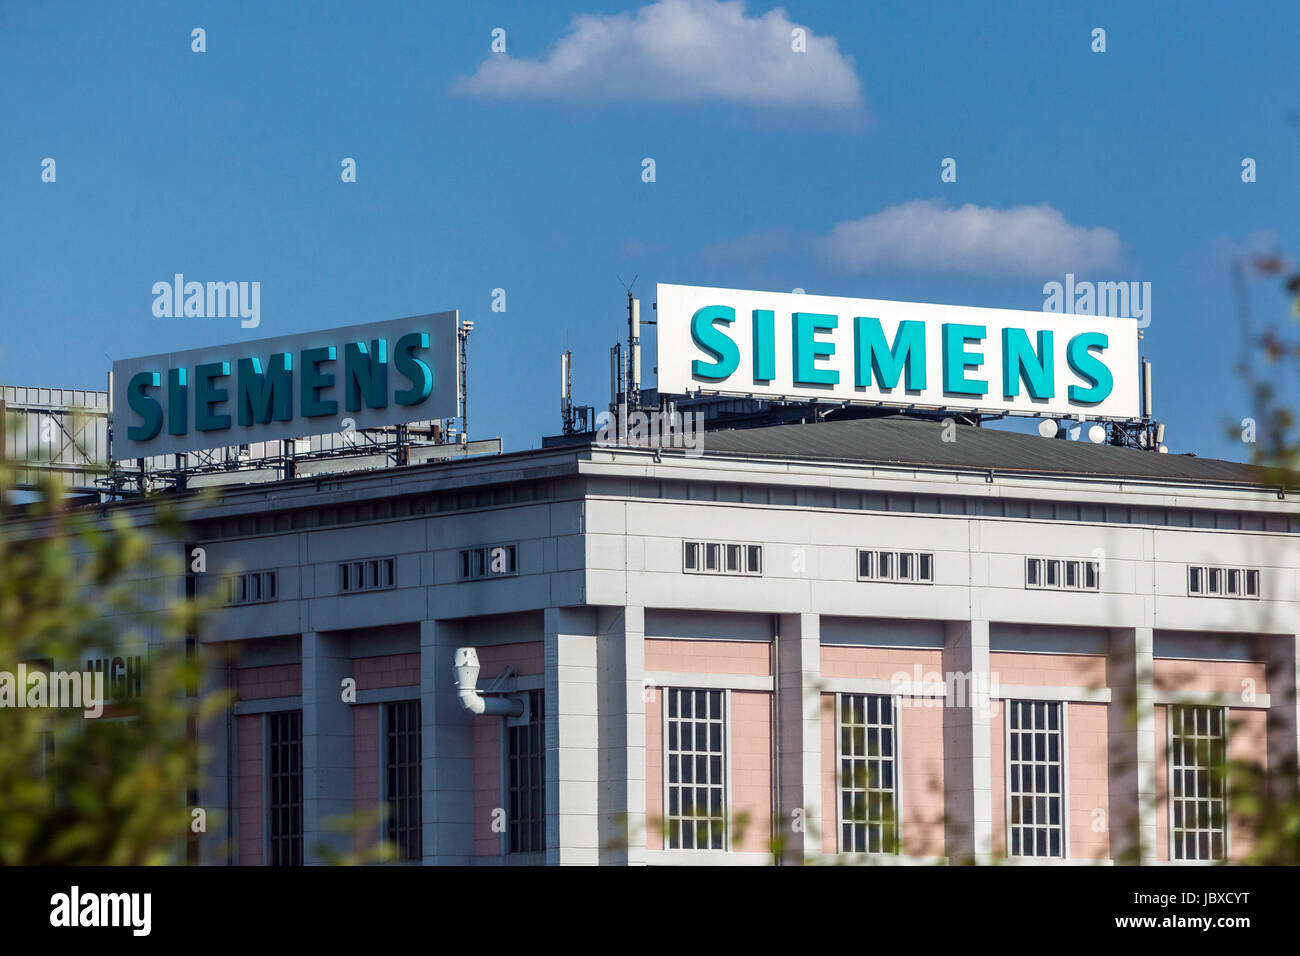 Siemens logo, sign, on rooftop of building, Dresden, Germany Siemens factory Stock Photo